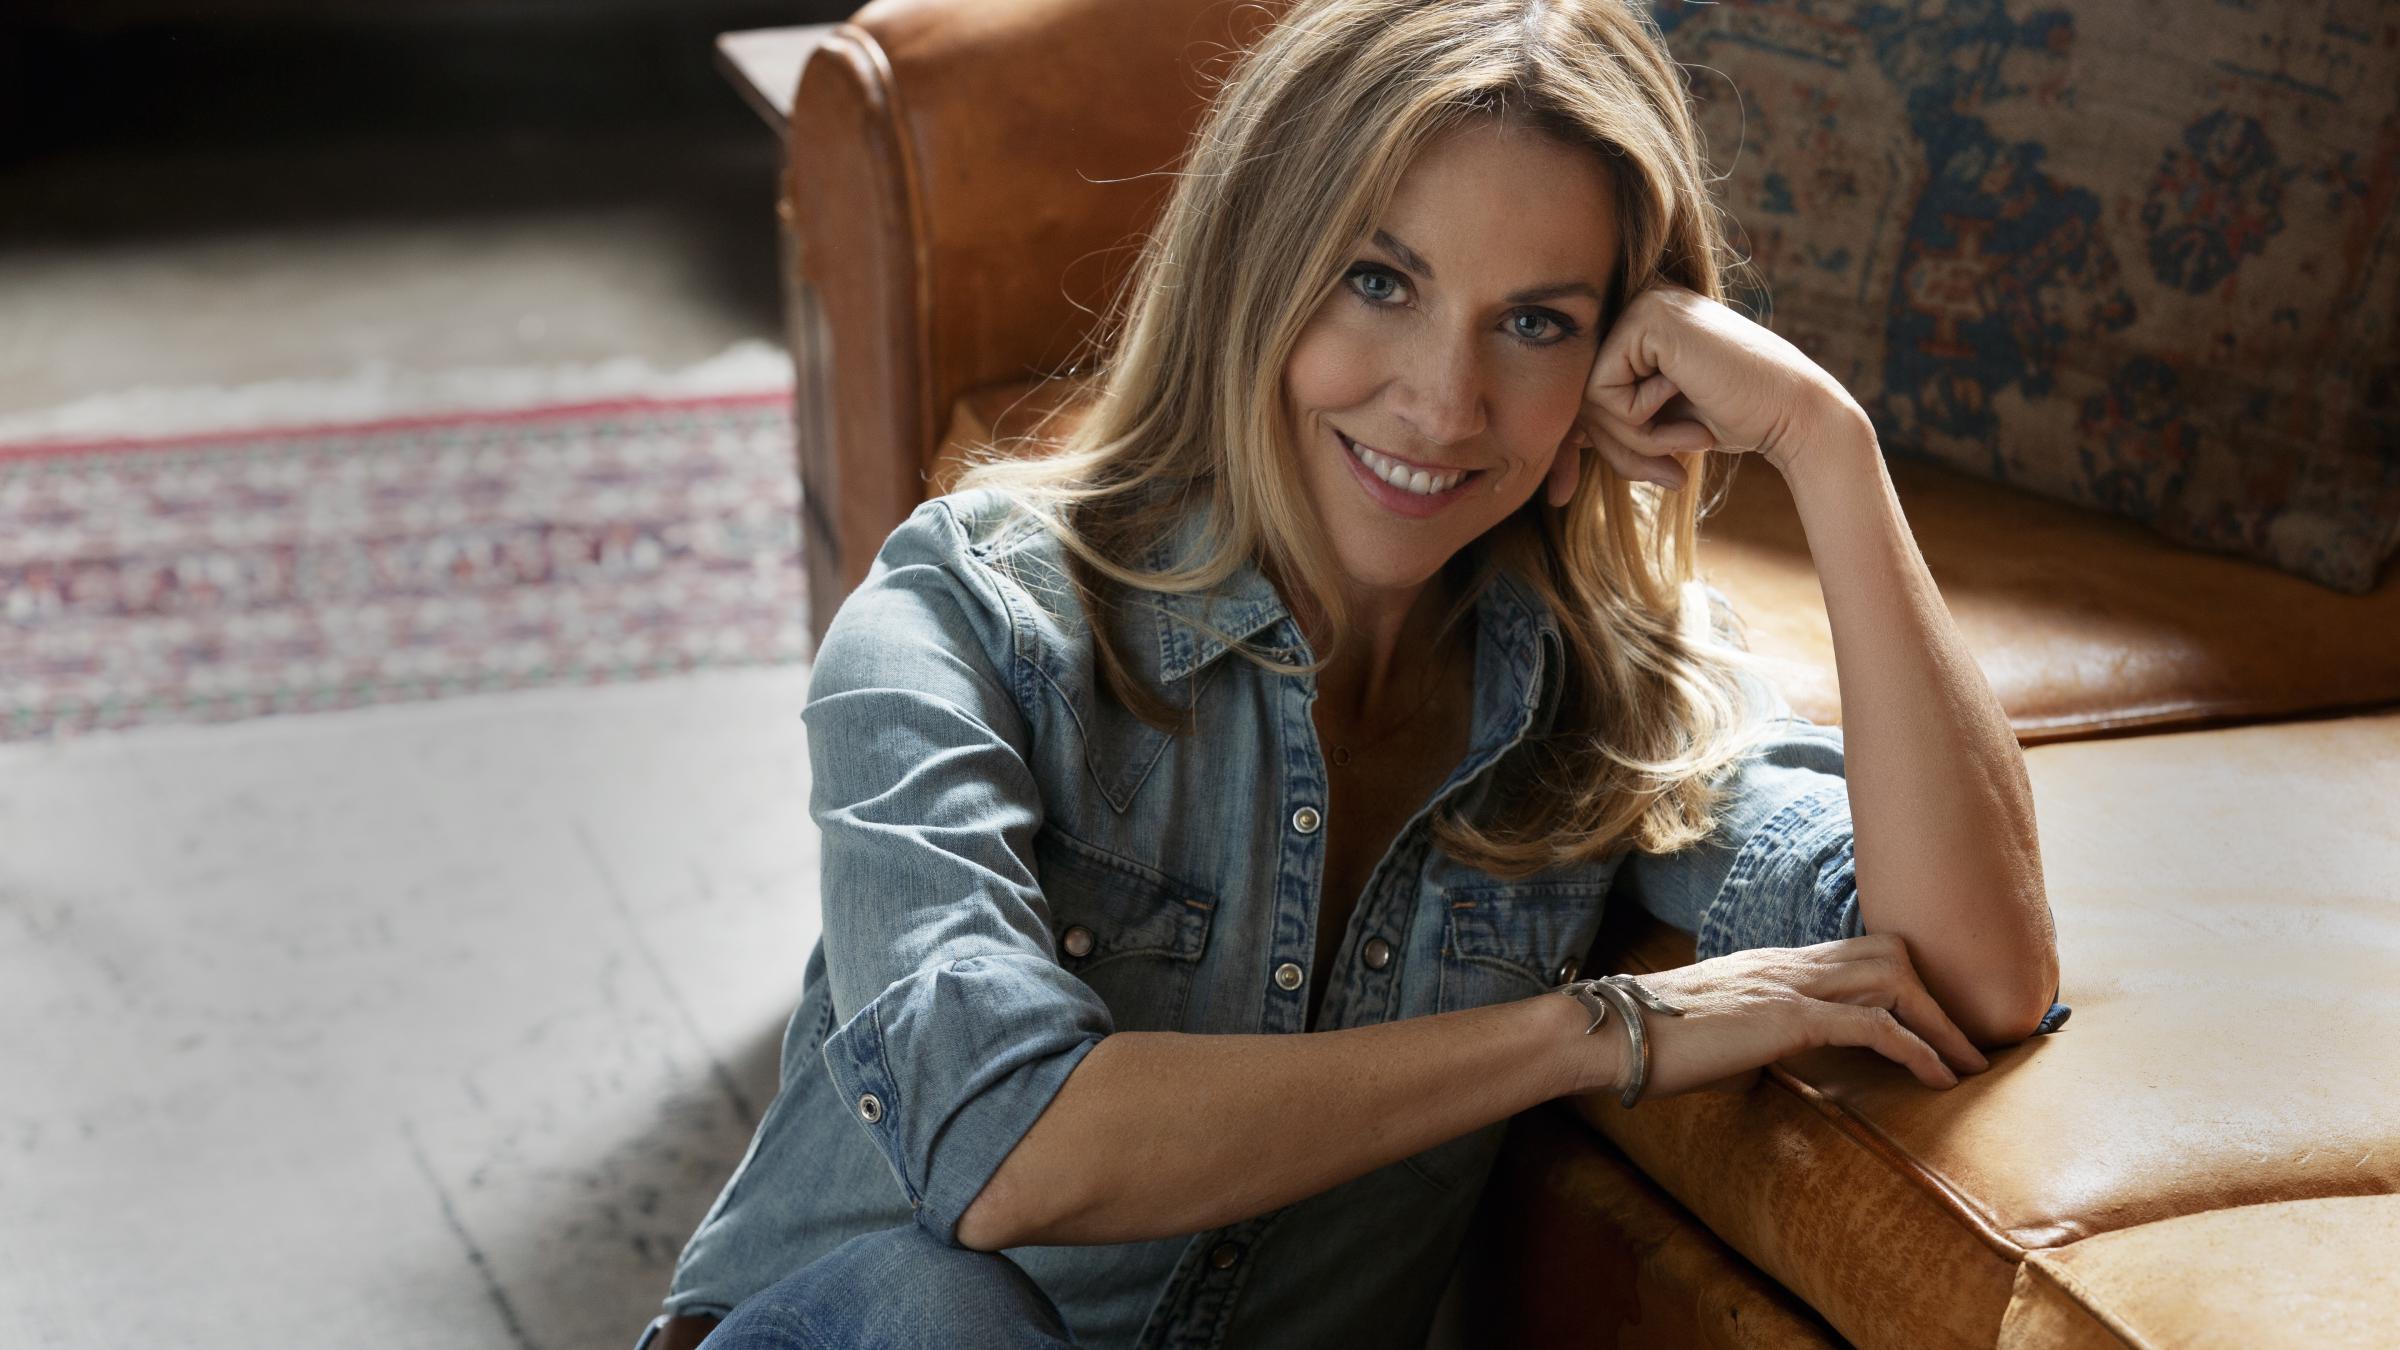 Sheryl Crow Says 'Threads' Is Her Last Album. And She's OK With That | WYSO2400 x 1350